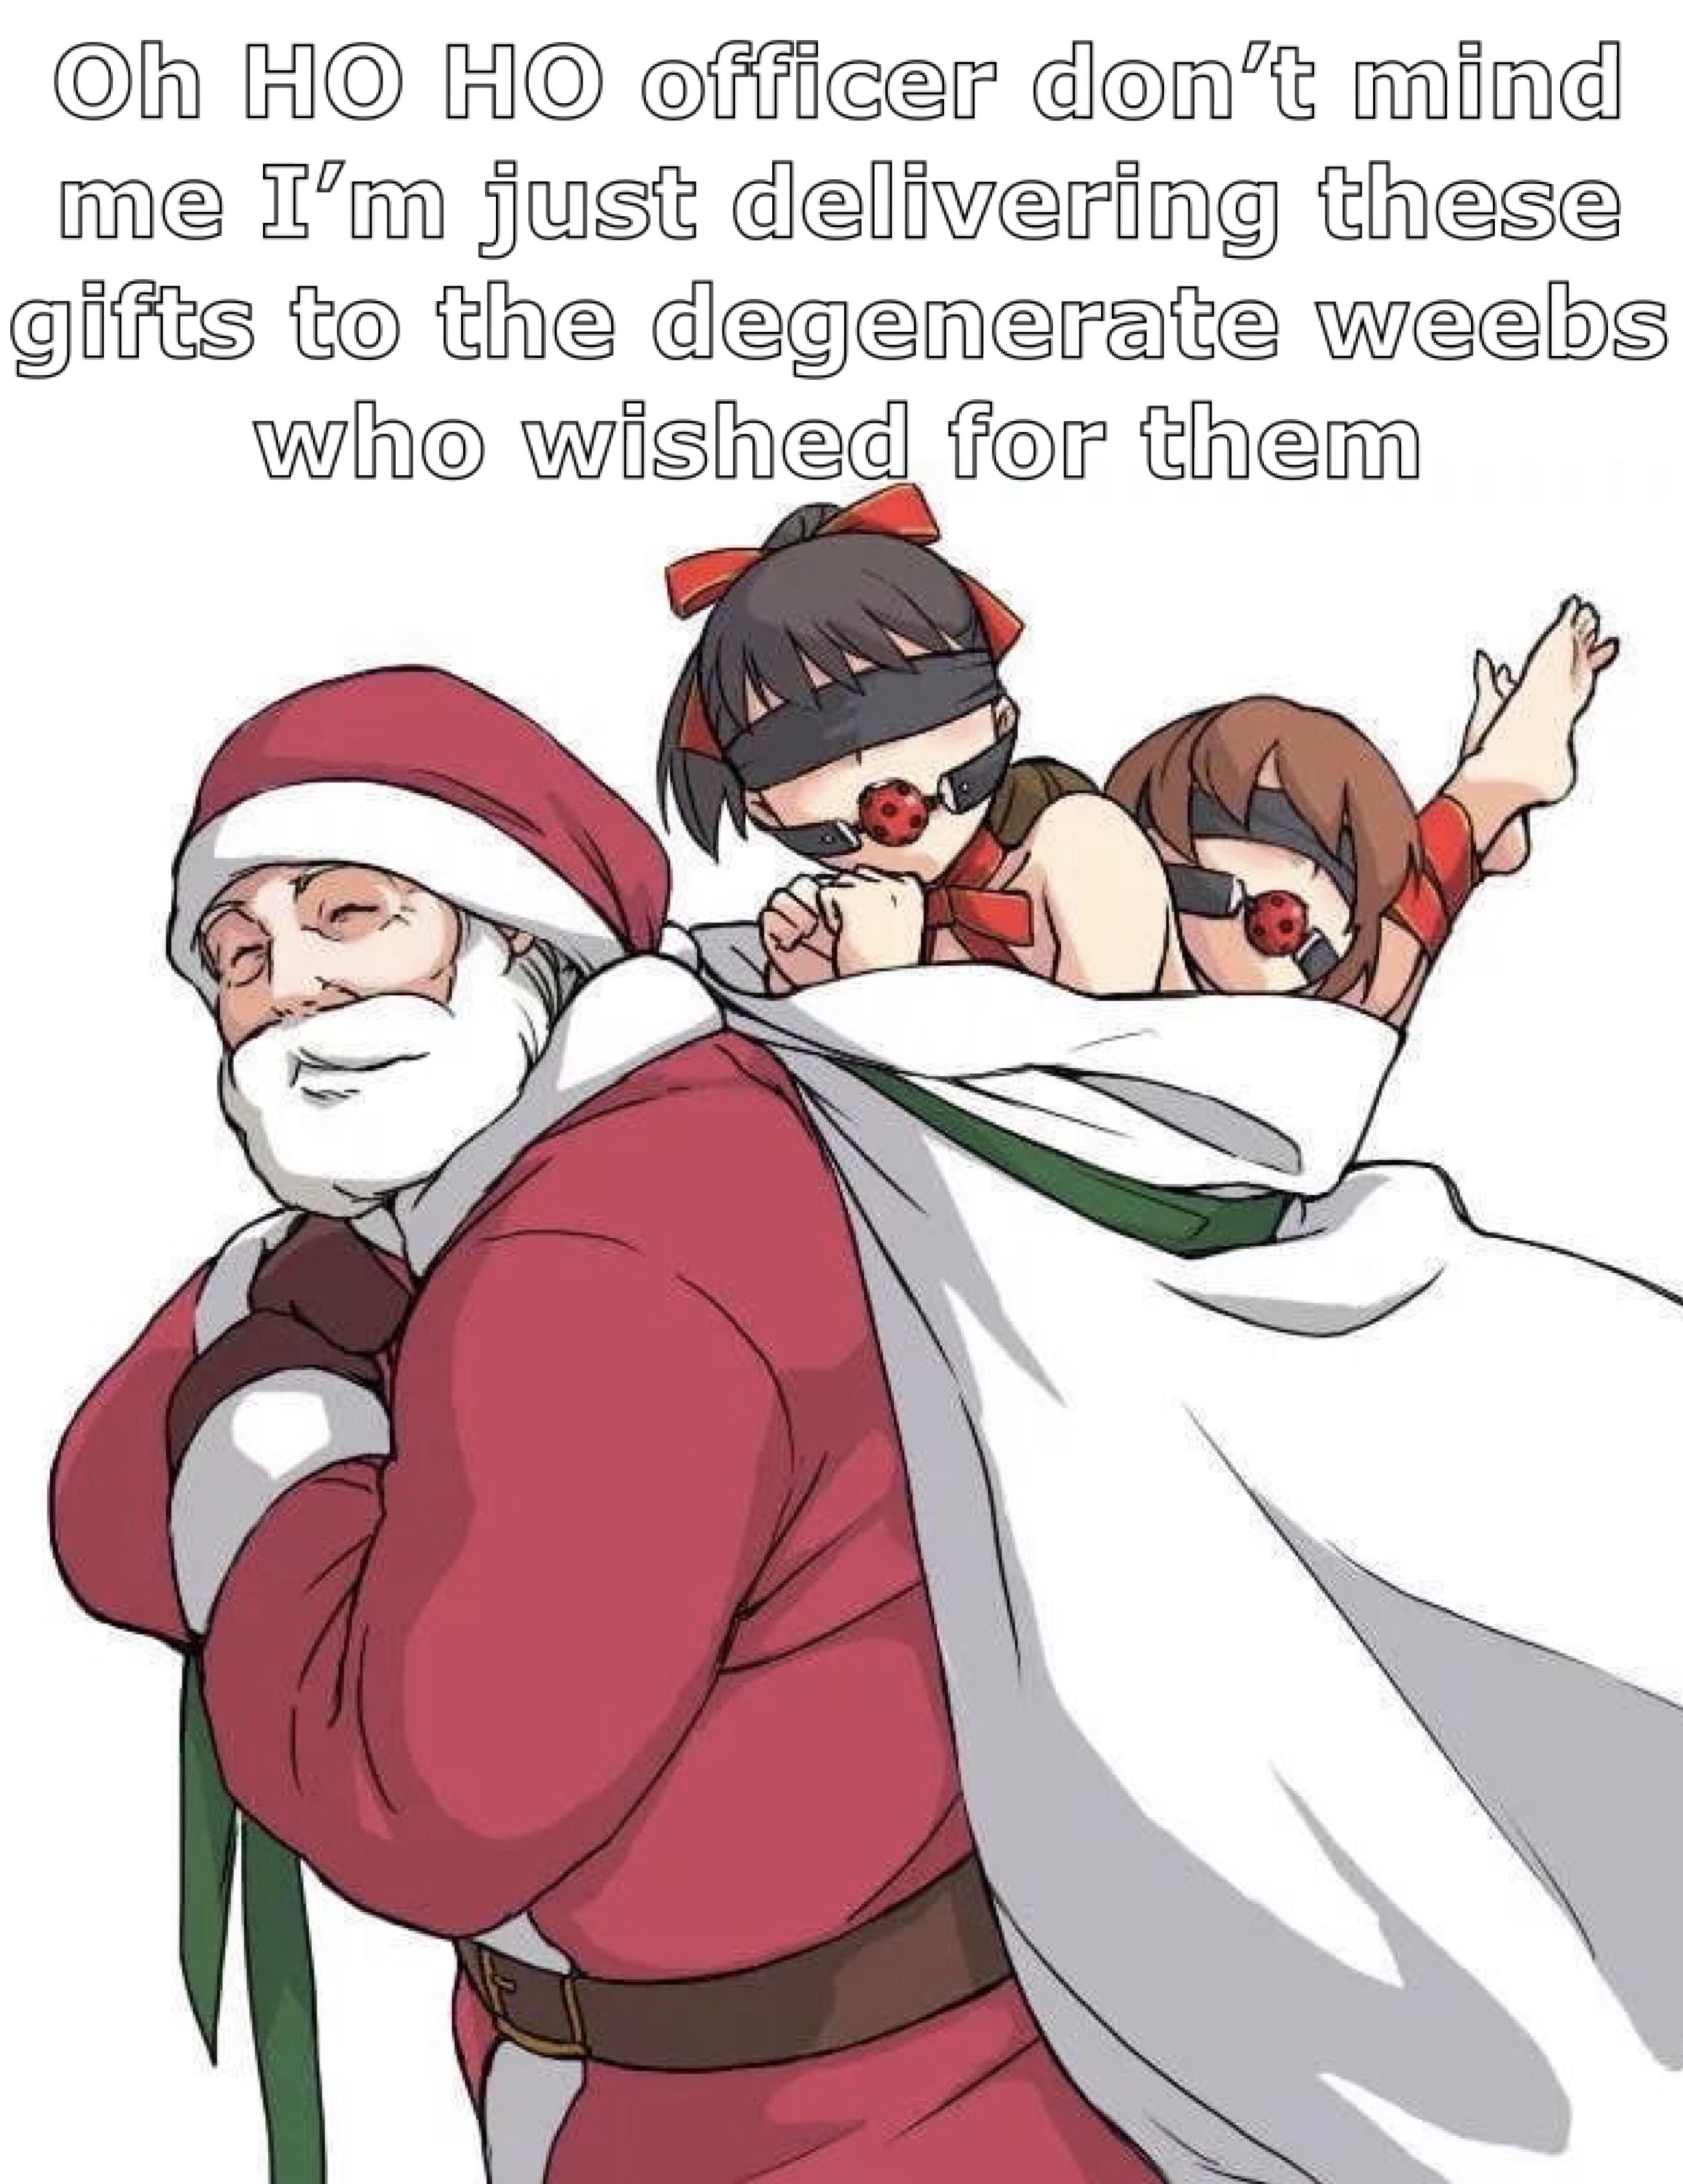 christmas lolicon - Oh Ho Ho officer don't mind me I'm just delivering these gifts to the degenerate weebs who wished for them